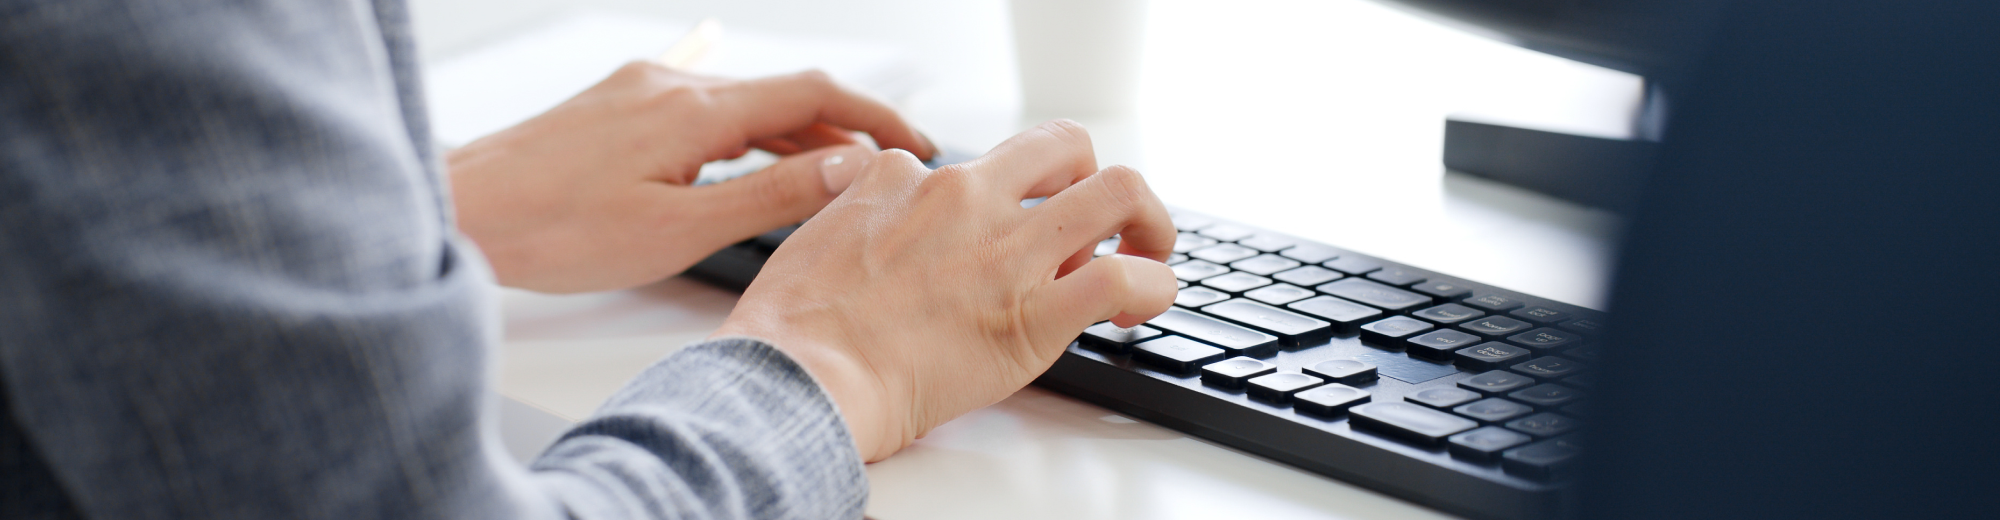 Closeup business people hands typing on keyboard computer desktop for using internet